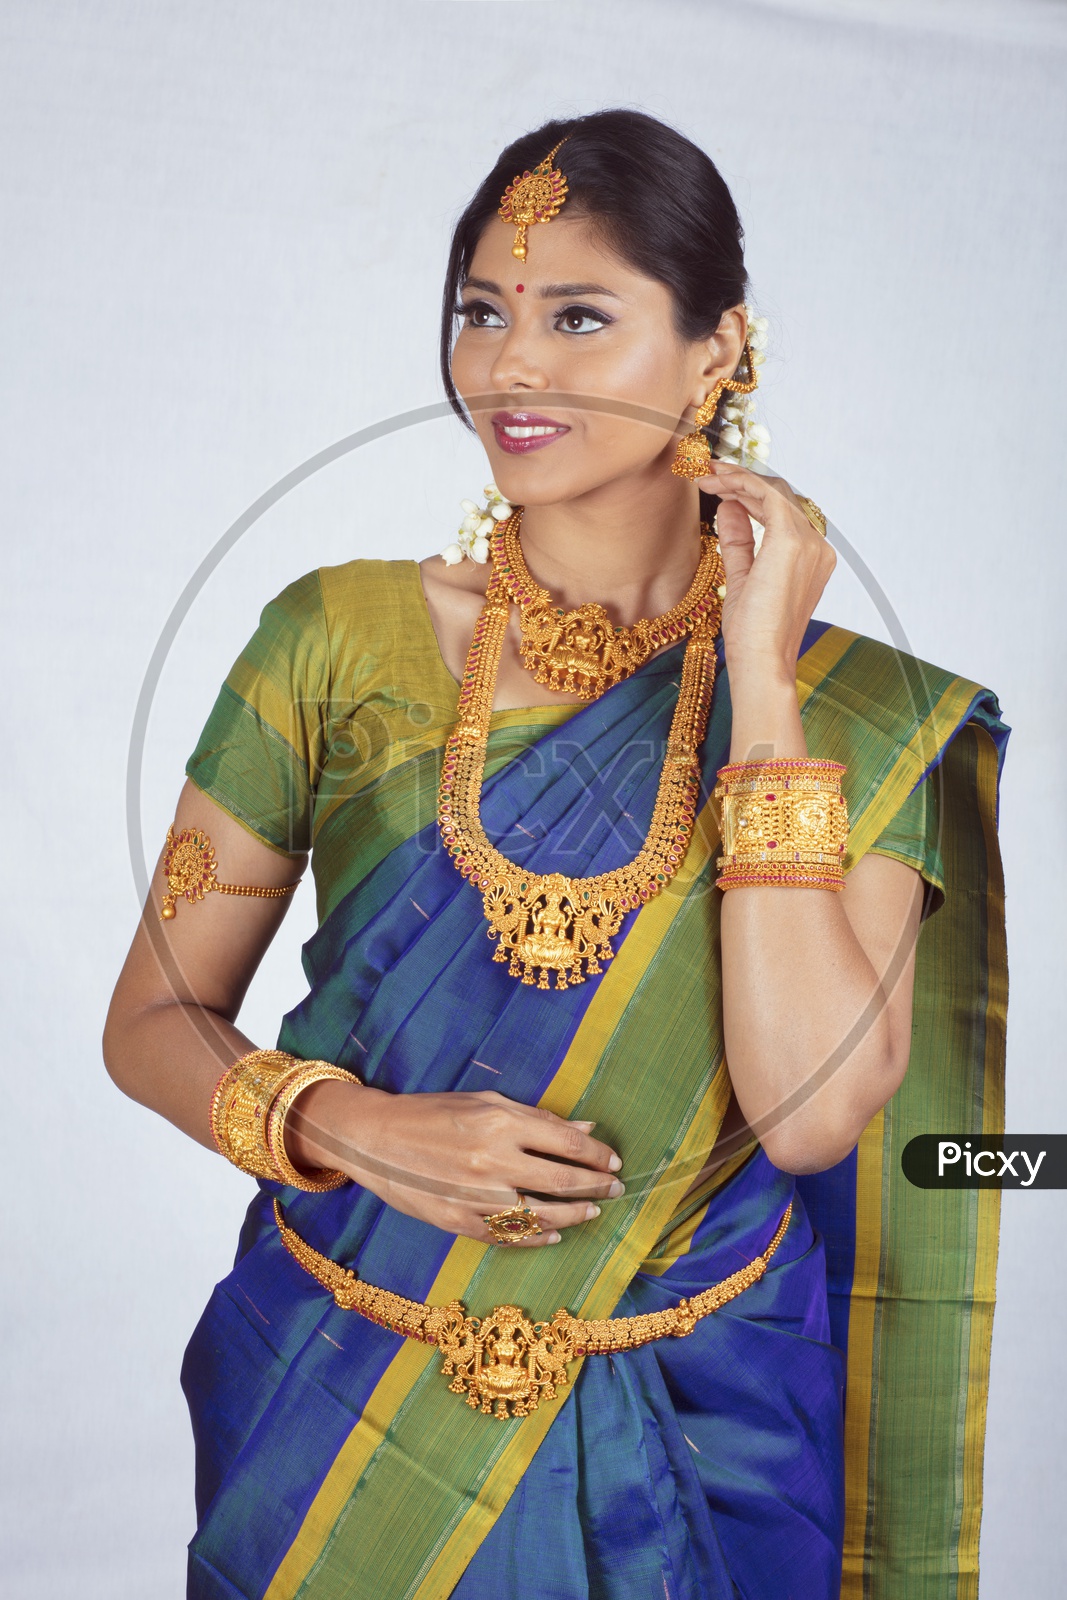 Traditional Indian Female/Woman Model in Blue Saree, green Blouse - Showing her earrings